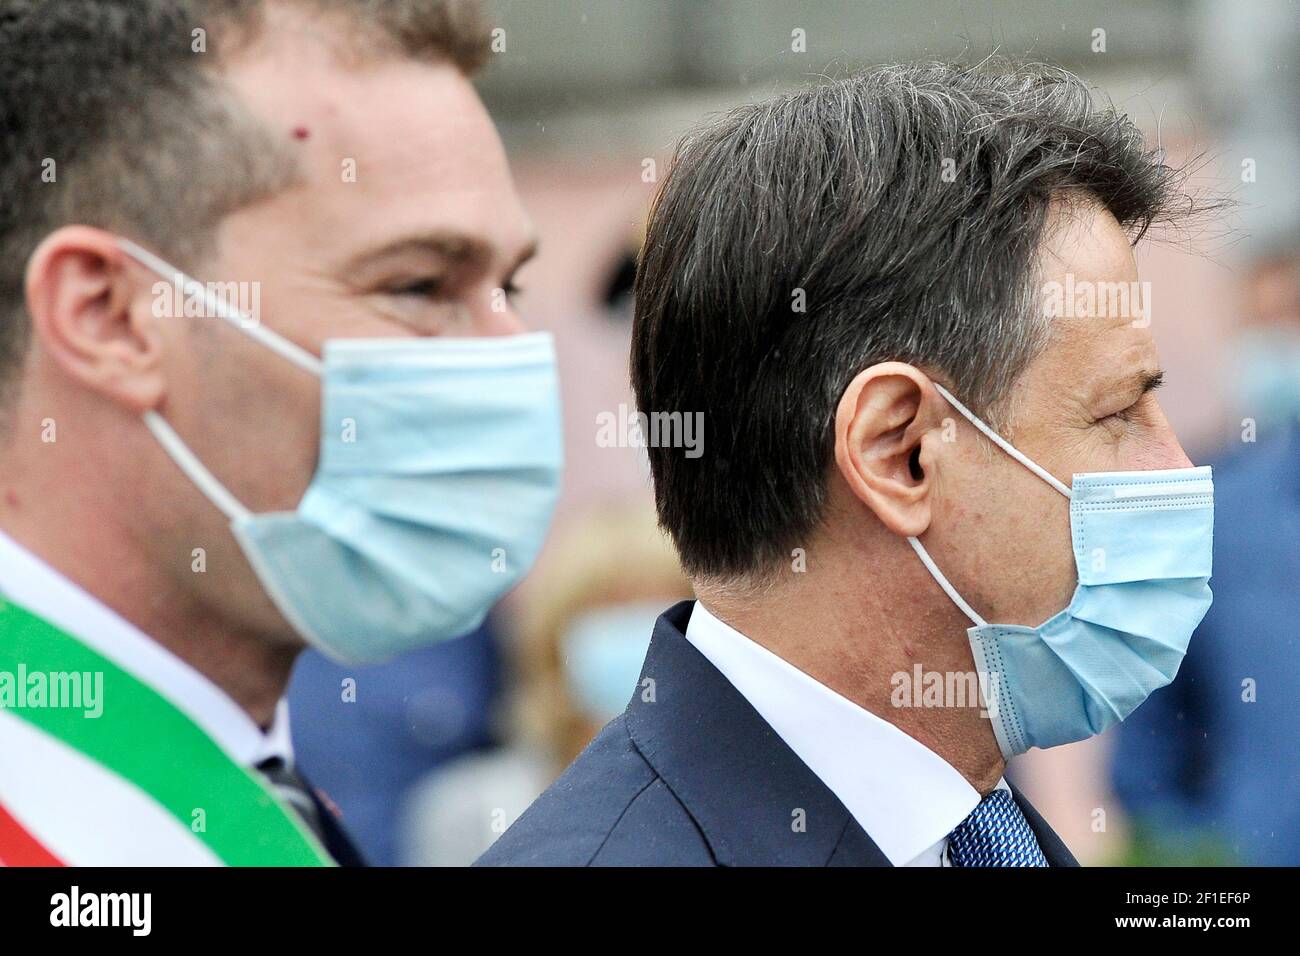 Giuseppe Conte President of the Council of Ministers of the Italian Republic wearing an anti-coronavirus mask, during a visit to the 'Francesco Gesuè' Stock Photo